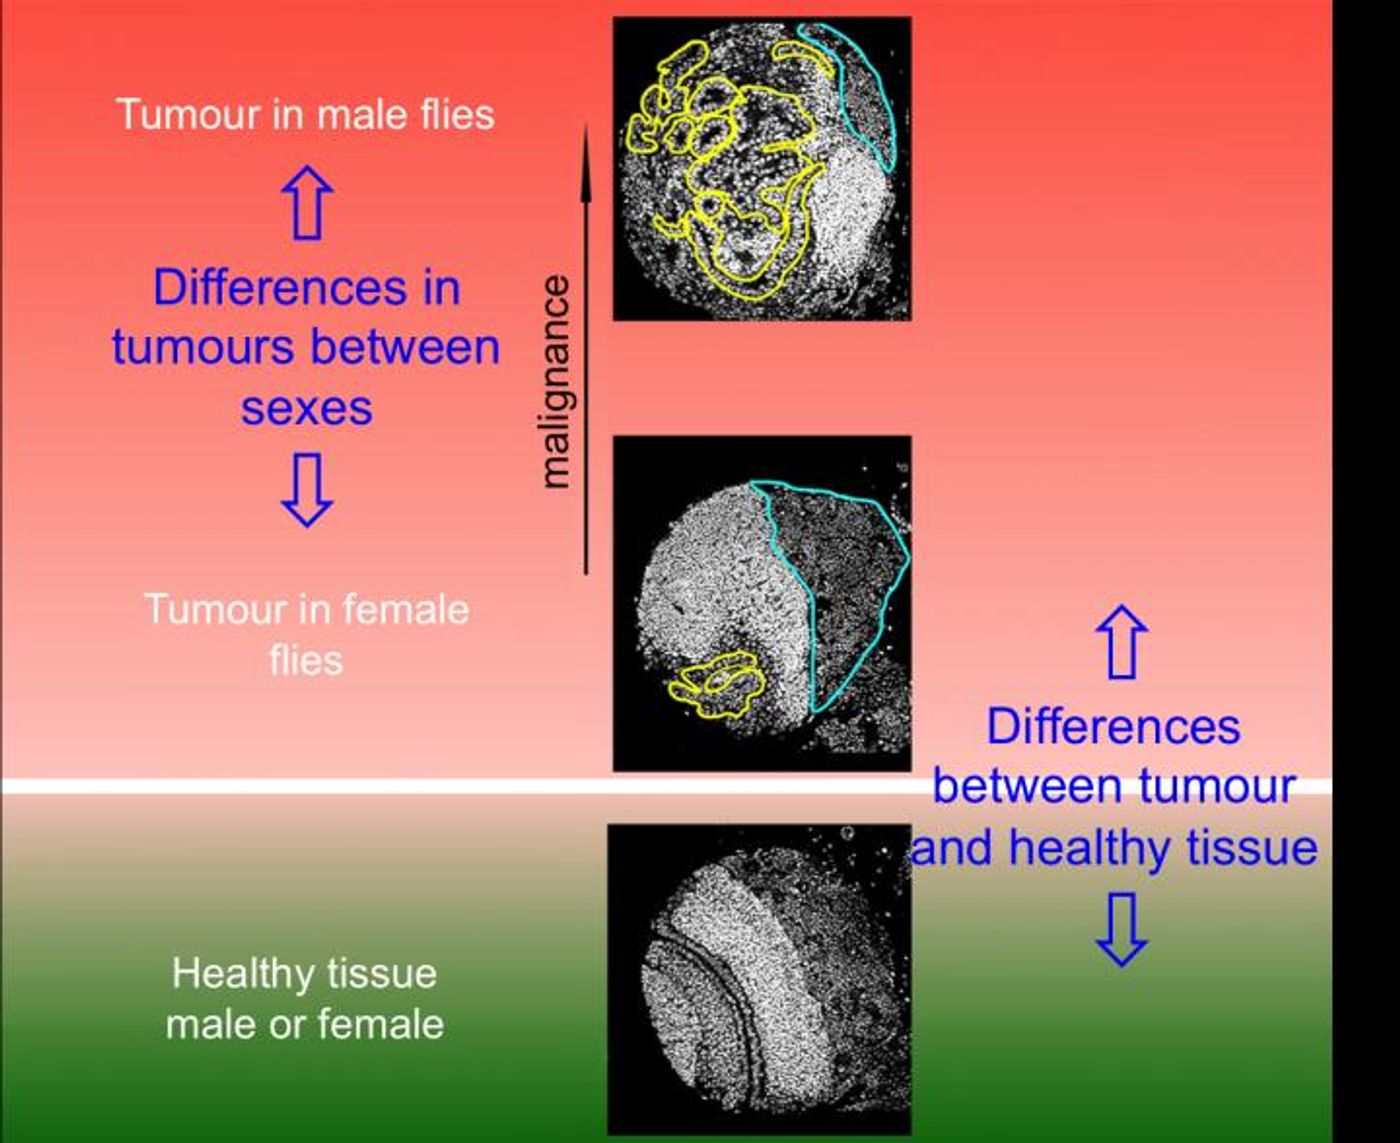 Differences between tumours in male and female vinegar flies. / Credit: Cayetano González, IRB Barcelona.